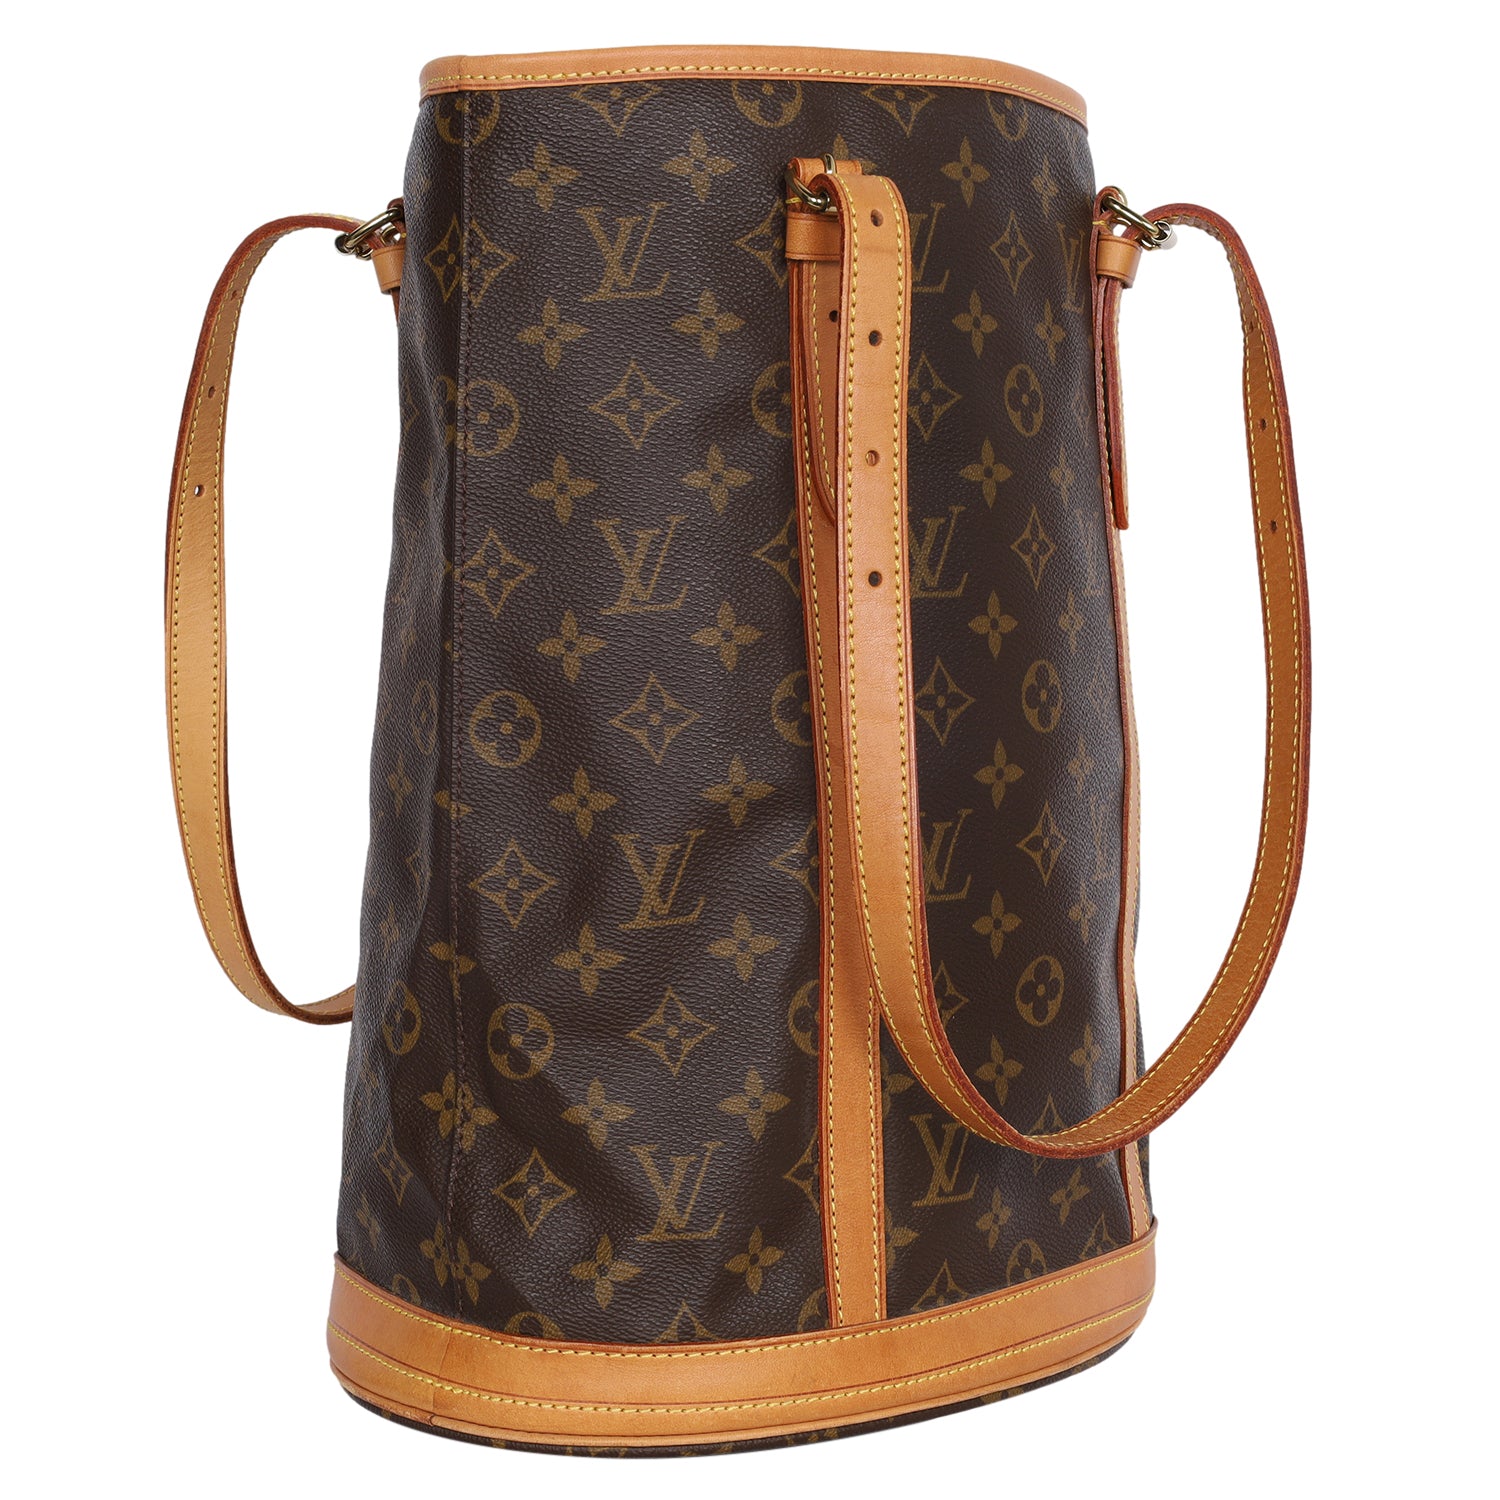 Louis+Vuitton+Sac+d%27Epaule+Bucket+Bag+GM+Red+Leather for sale online